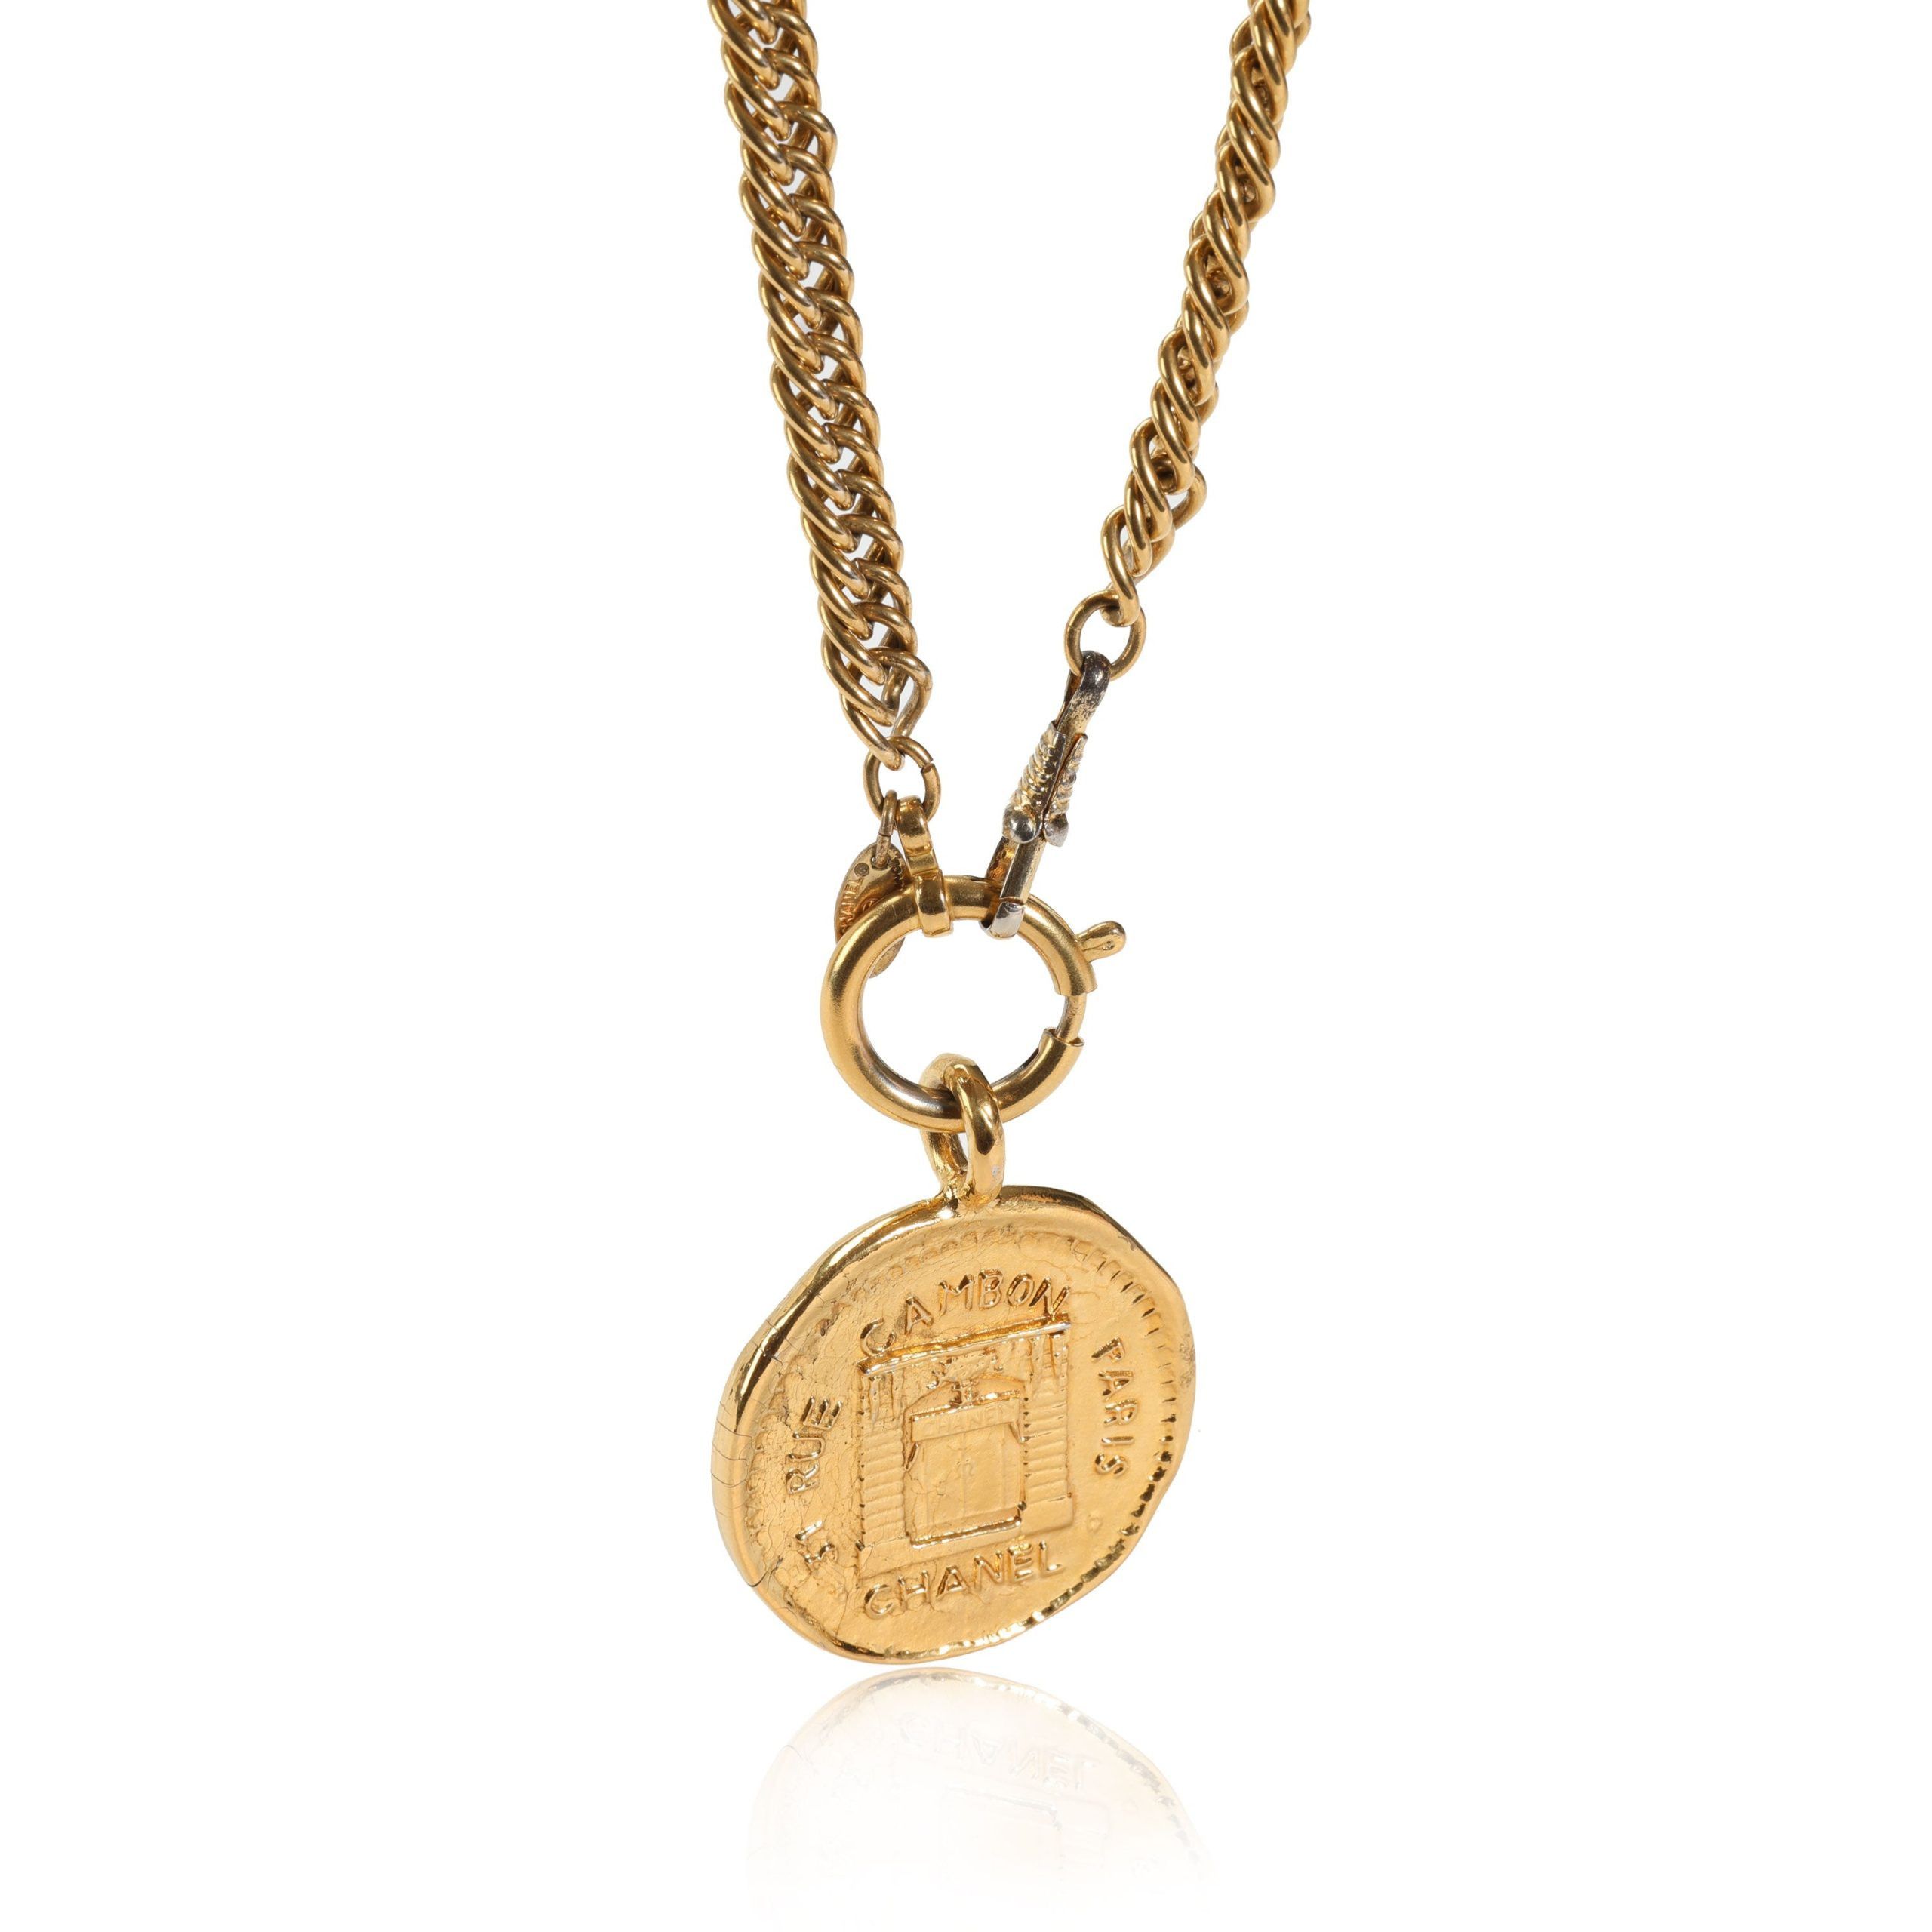 Chanel Chanel Vintage 31 Rue Cambon Graphic Medallion Necklace Size ONE SIZE - 1 Preview